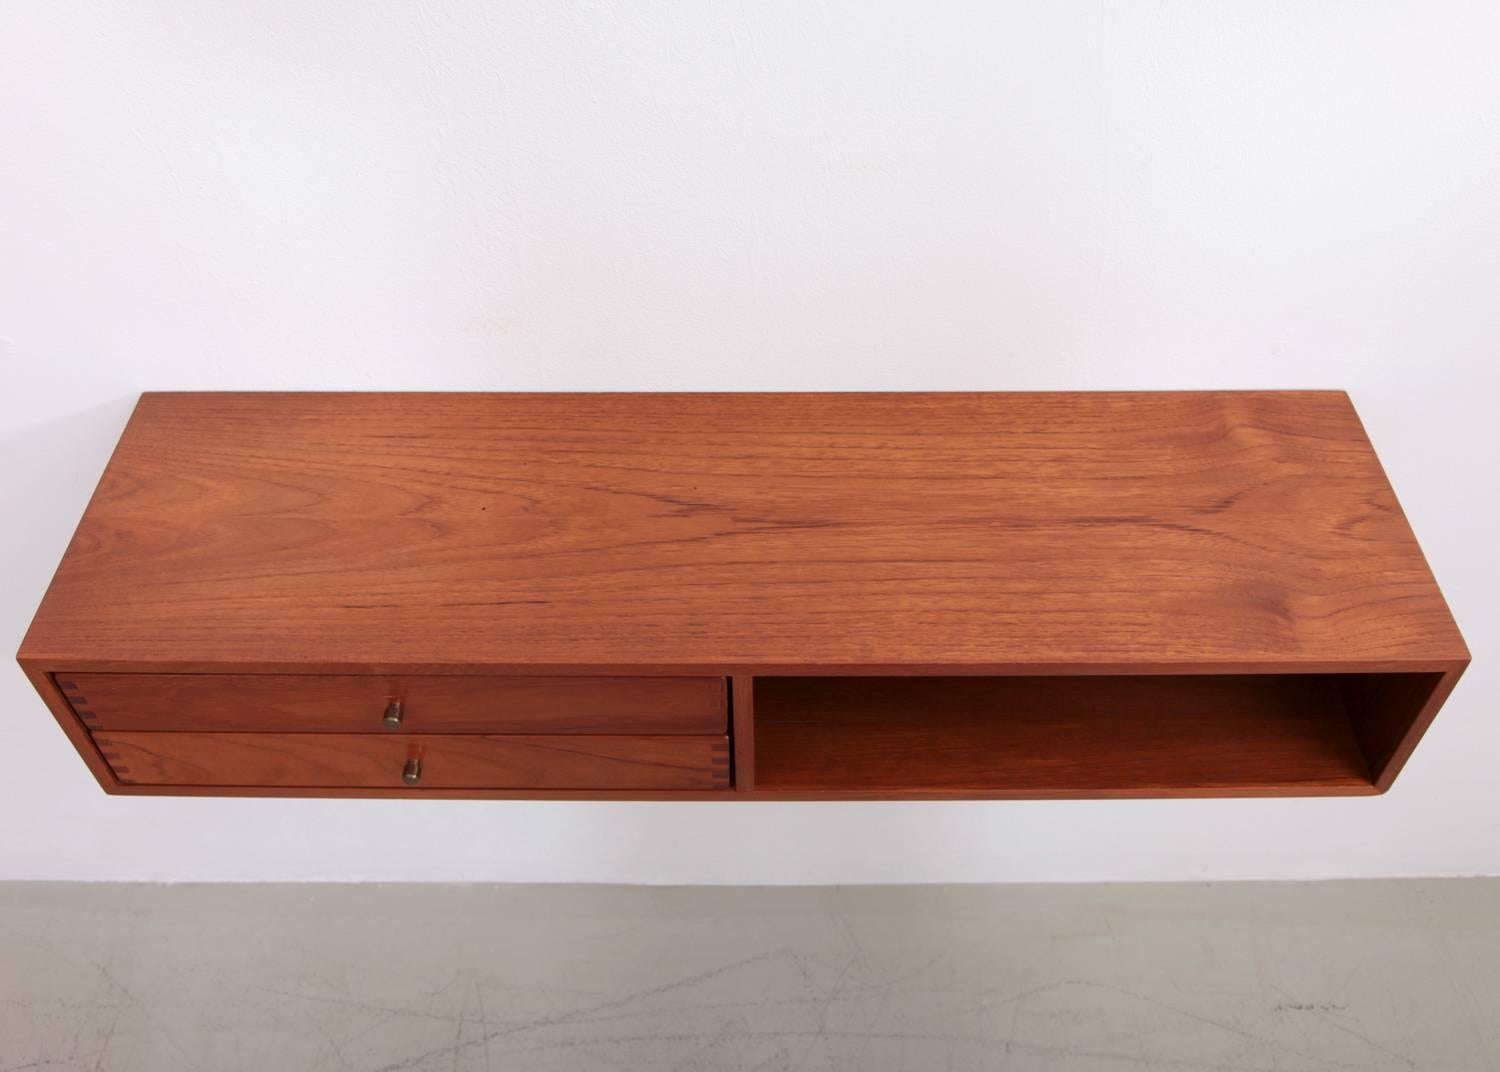 Wall-mounted console made of teakwood, designed by Kai Kristiansen and produced by Aksel Kjersgaard, Denmark.